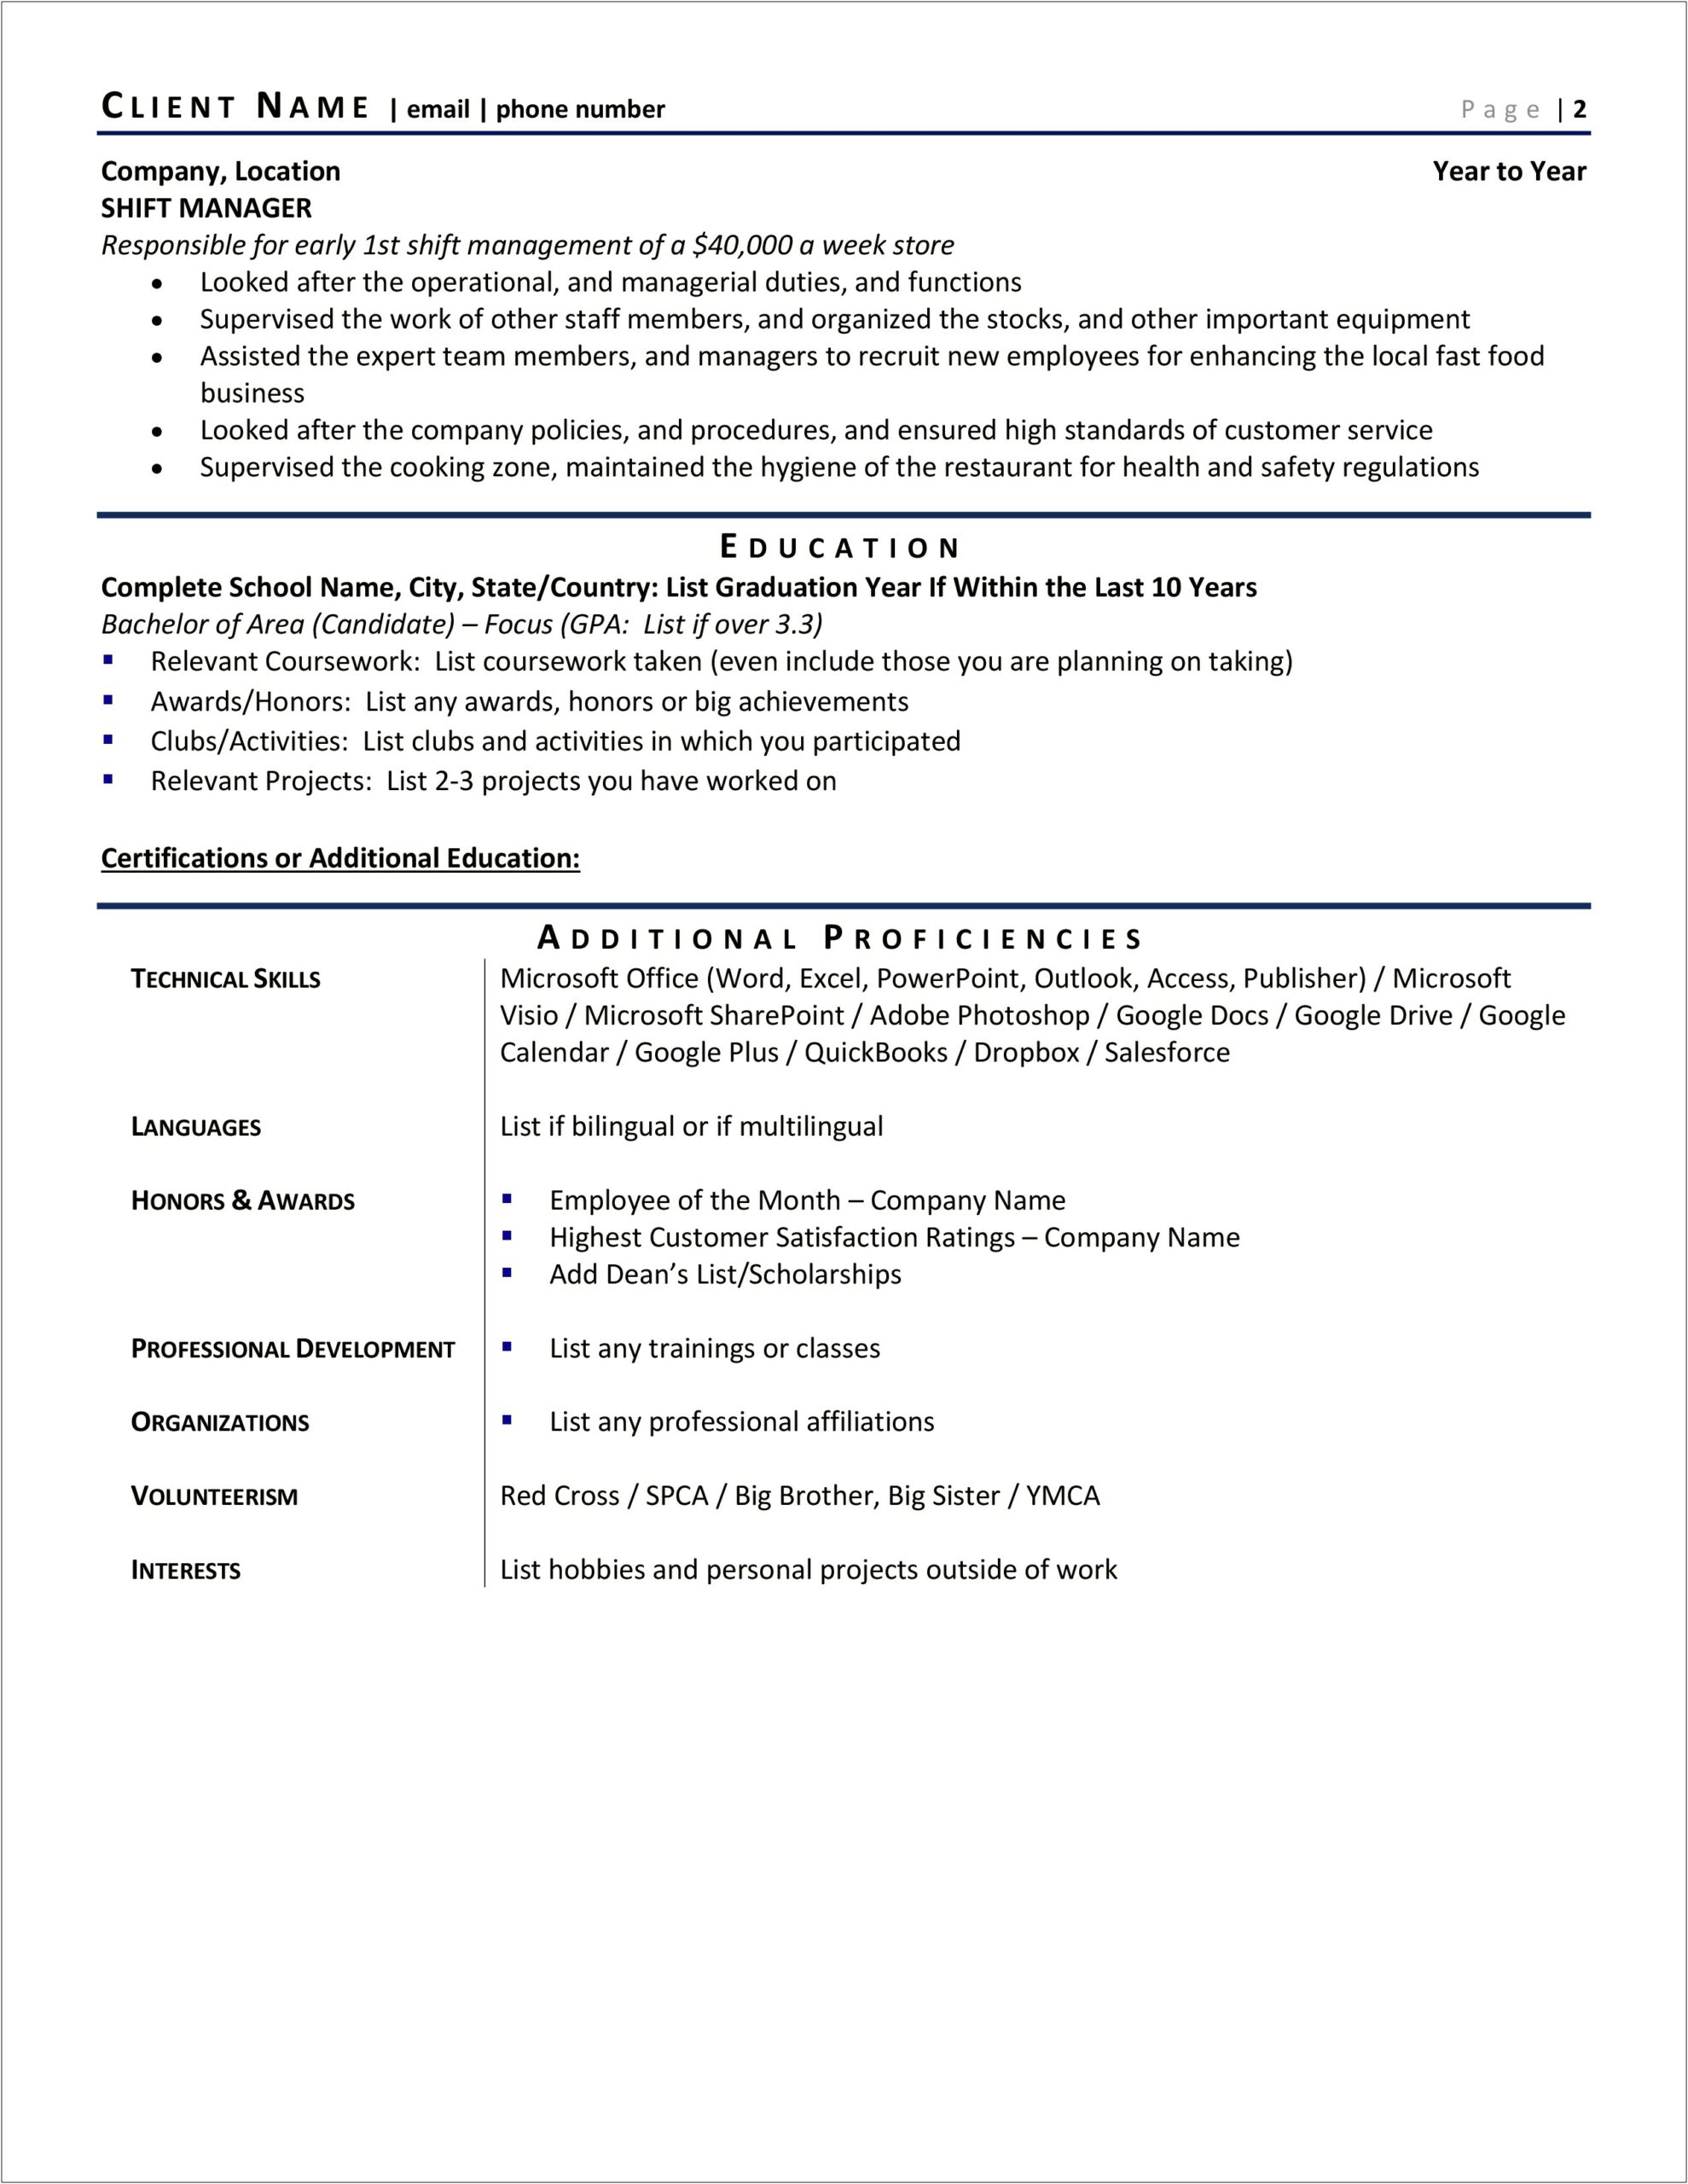 Good Interests To List On A Resume